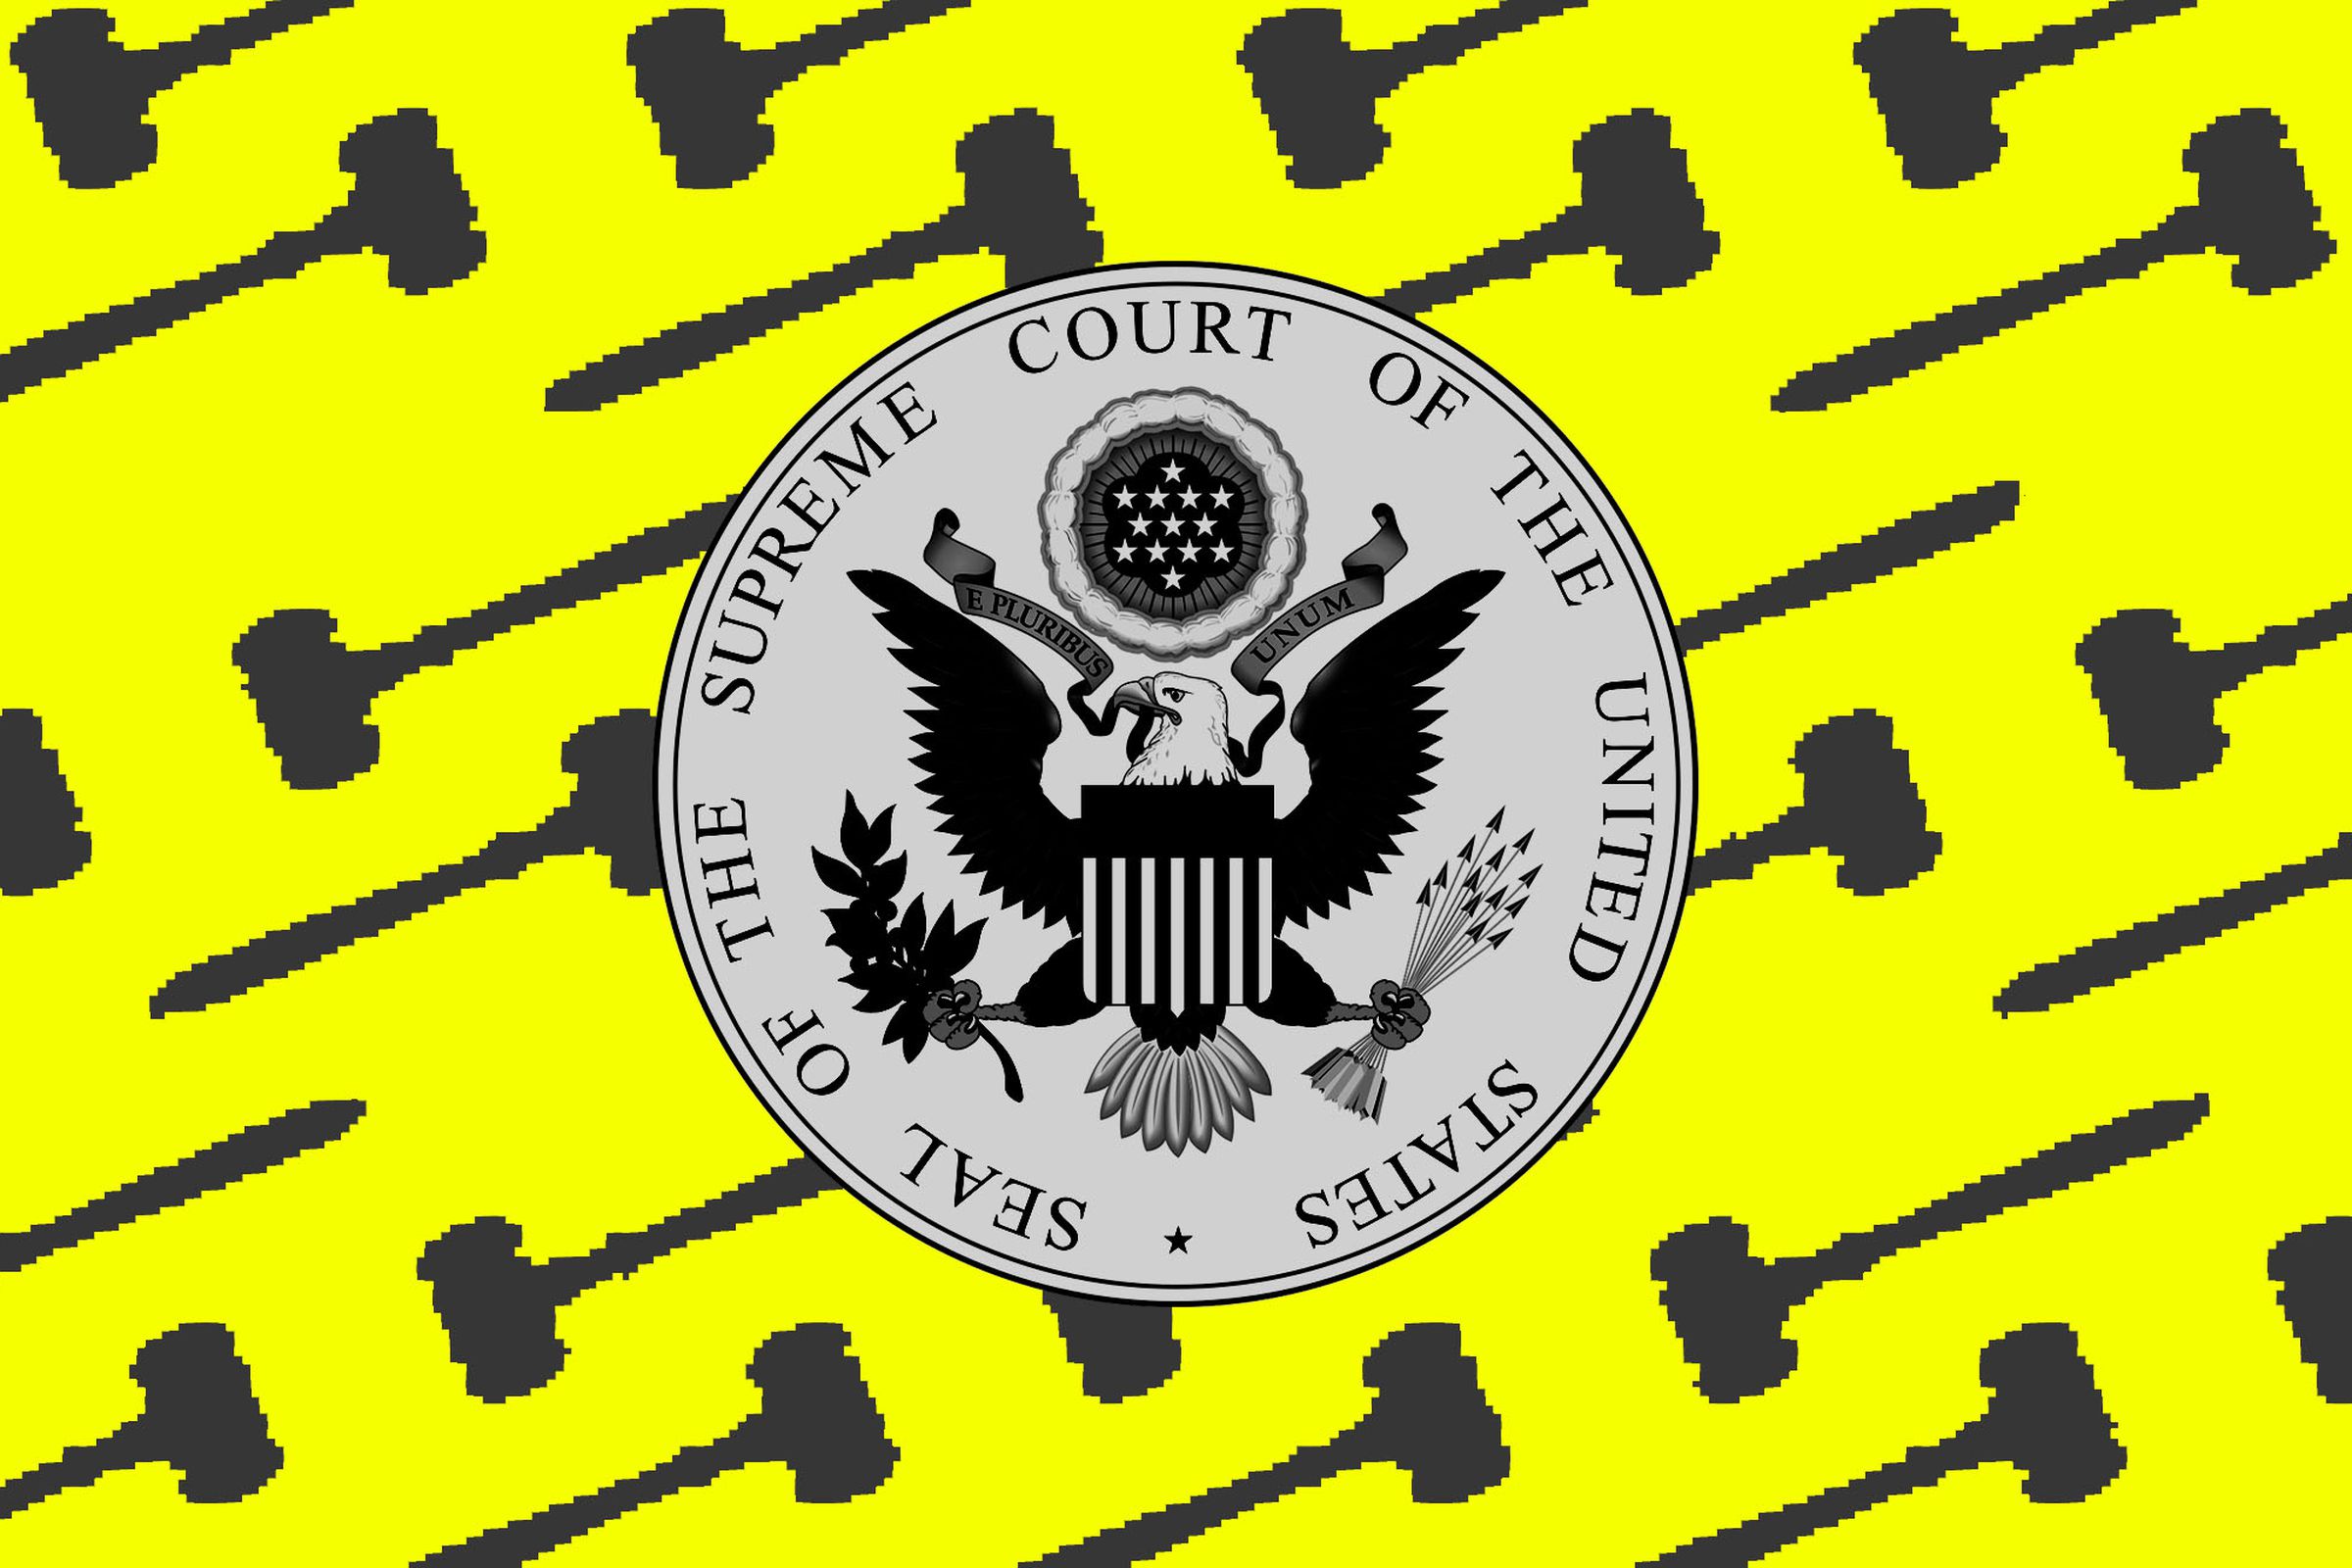 Photo illustration of the seal of the Supreme Court building with gavels behind.